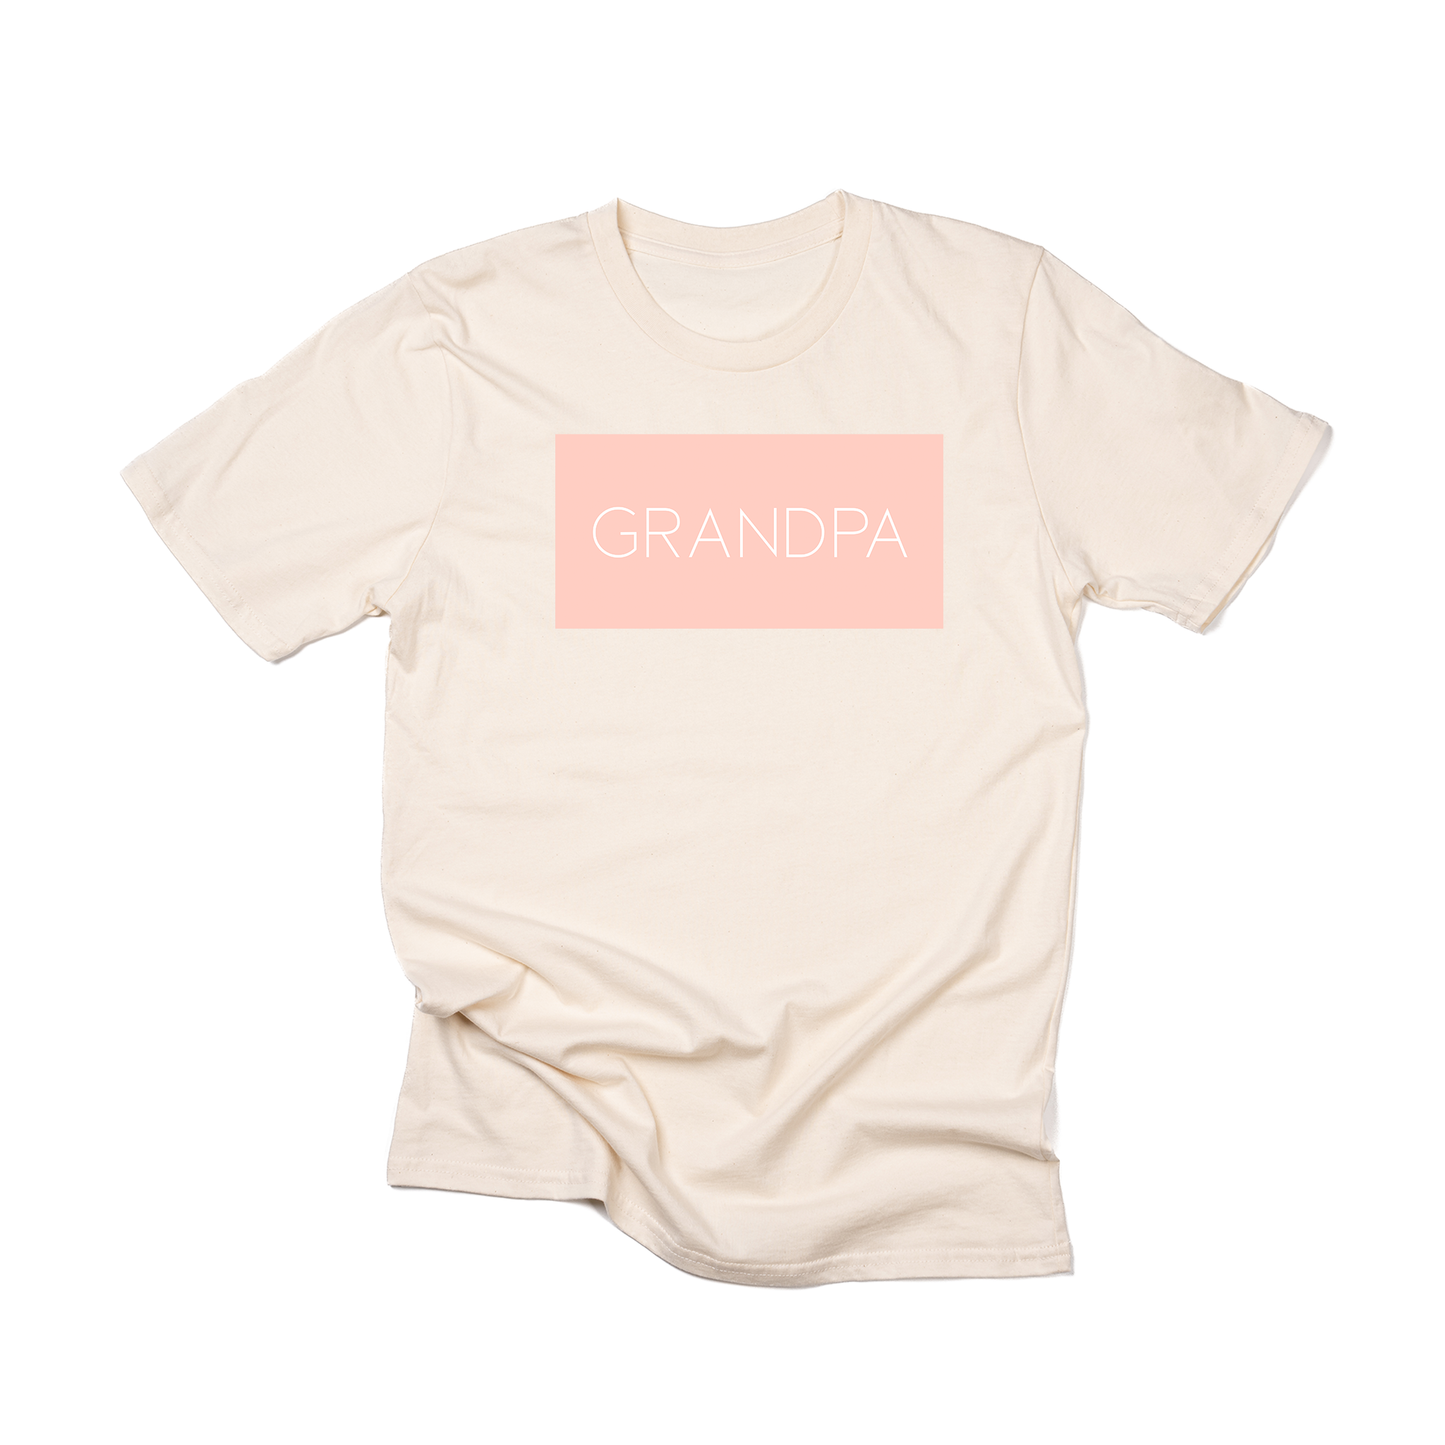 Grandpa (Boxed Collection, Ballerina Pink Box/White Text, Across Front) - Tee (Natural)